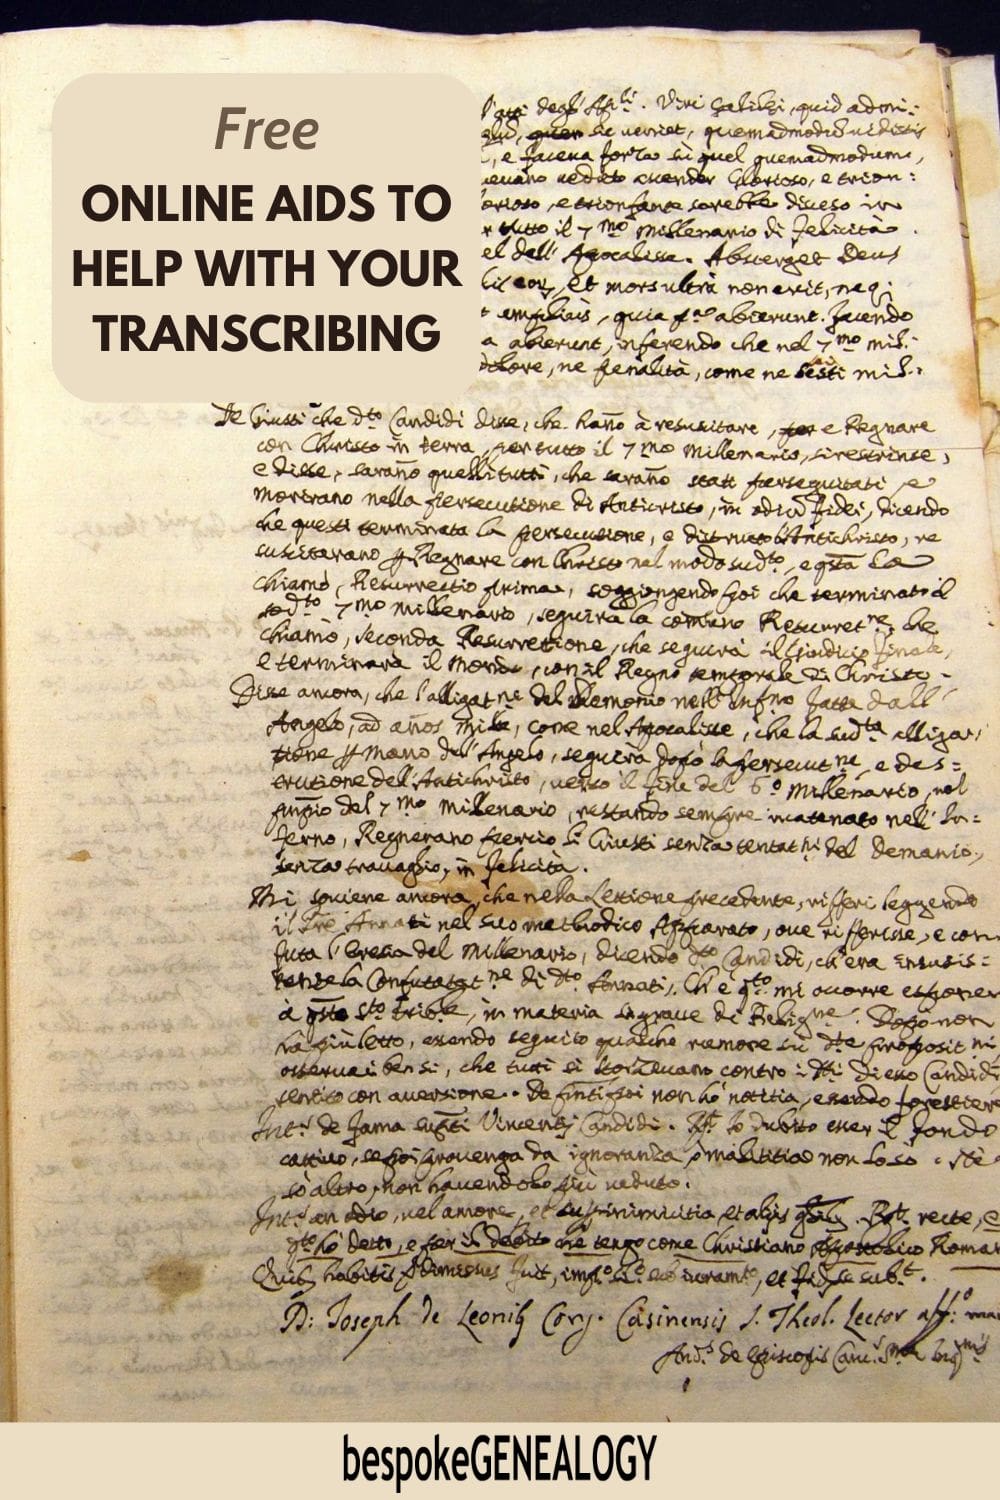 Free online aids to help with your transcribing. Photo of an old, handwritten document.